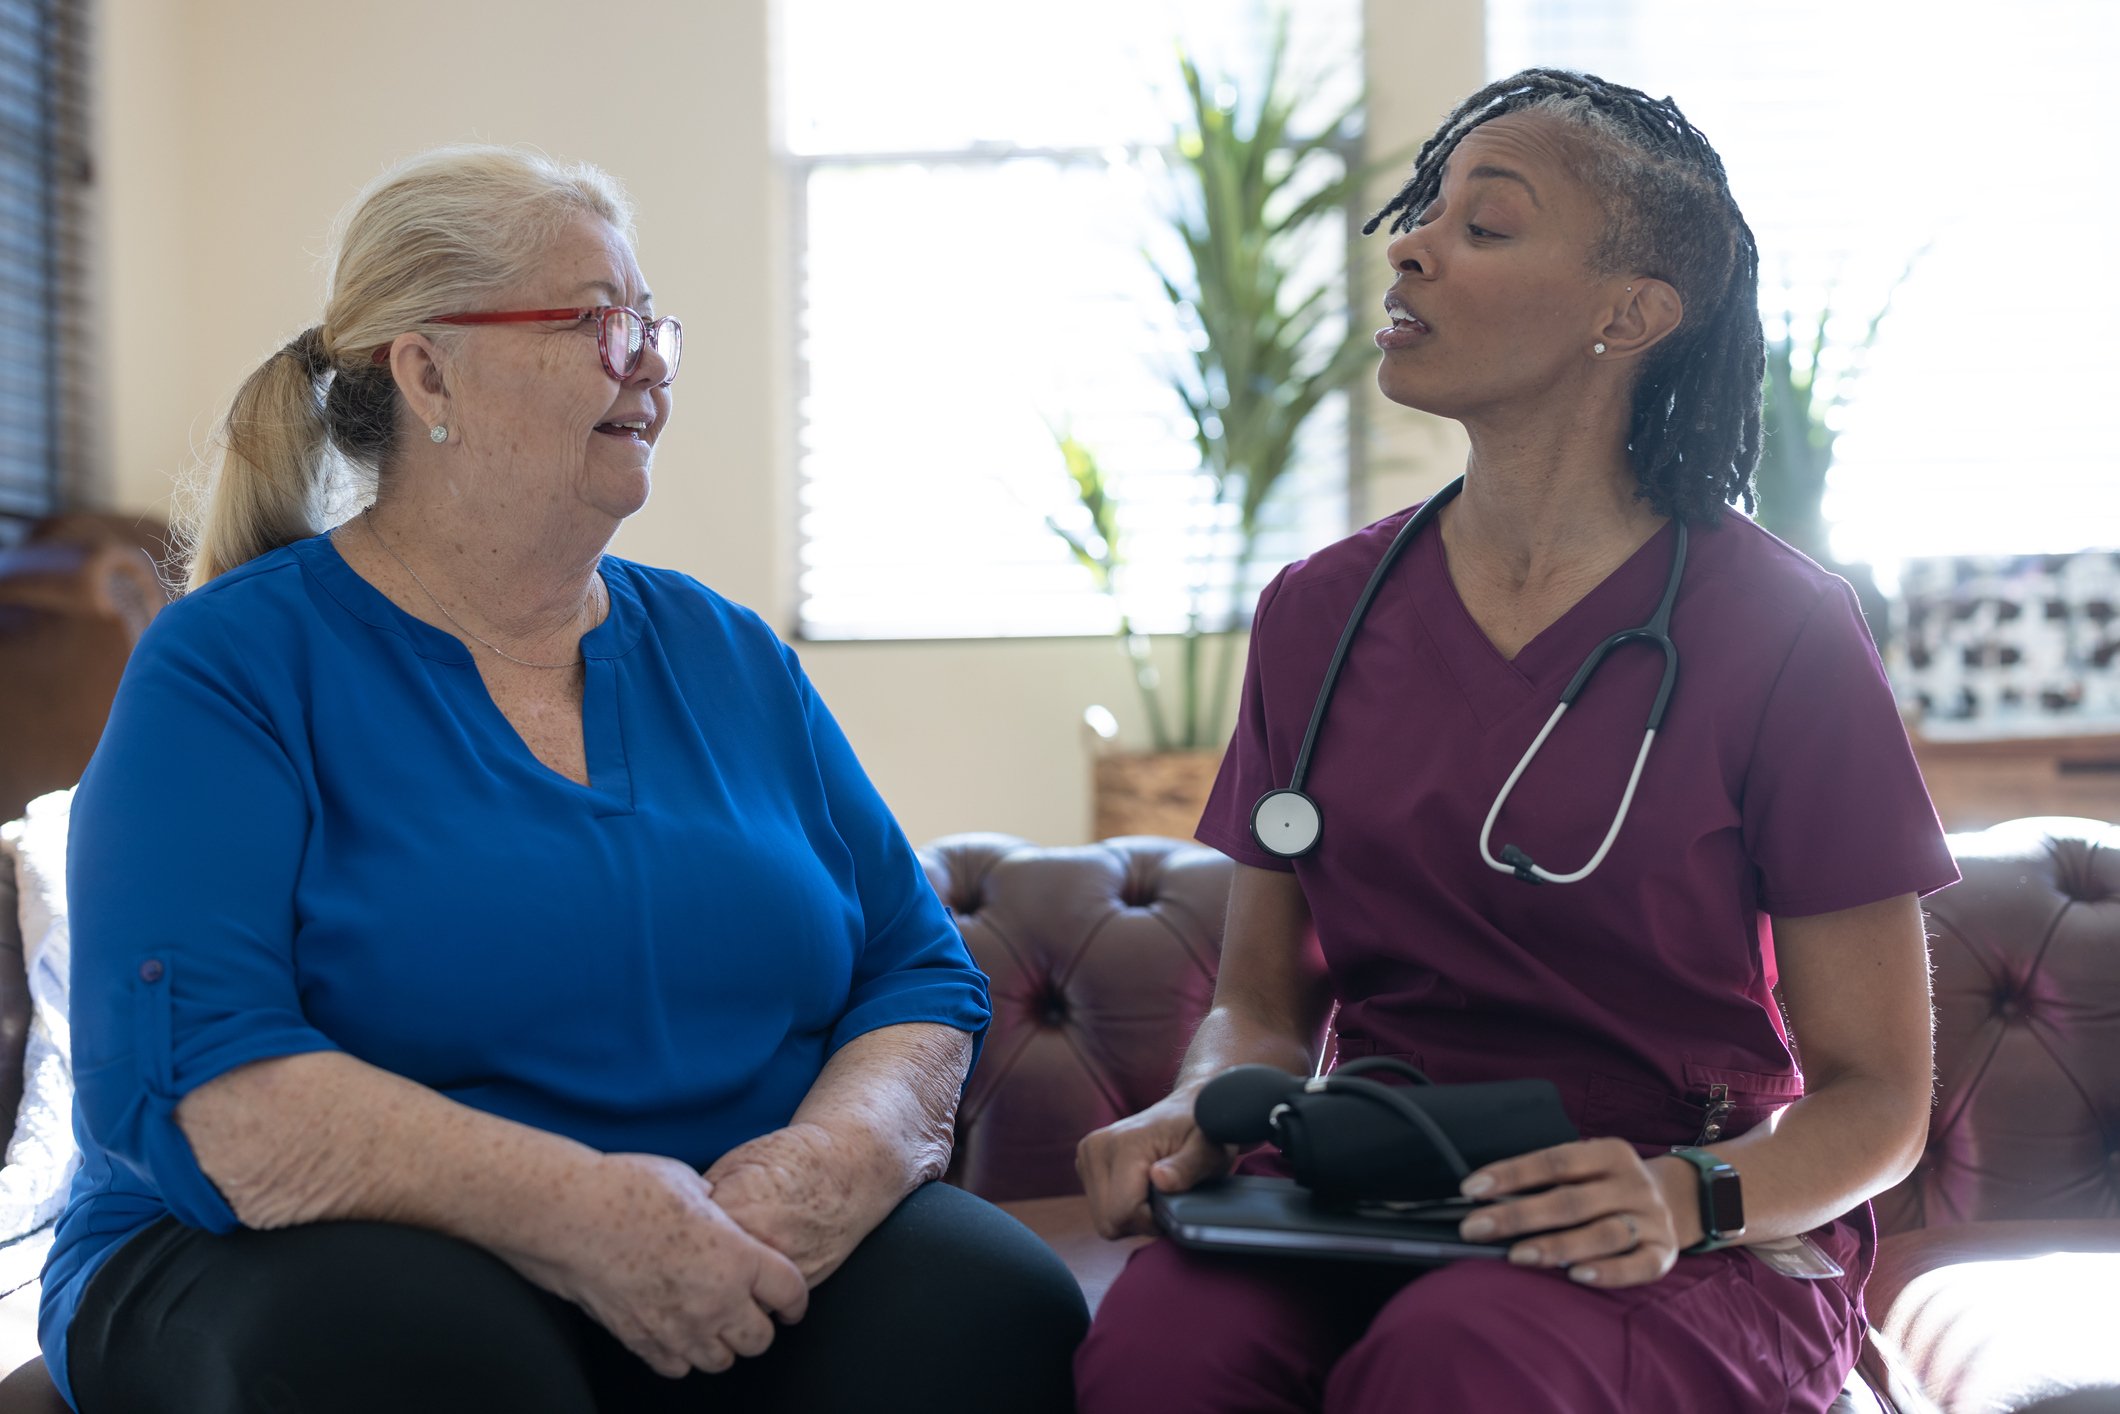 Healthcare professional in scrubs with stethoscope speaking to an older woman sitting indoors